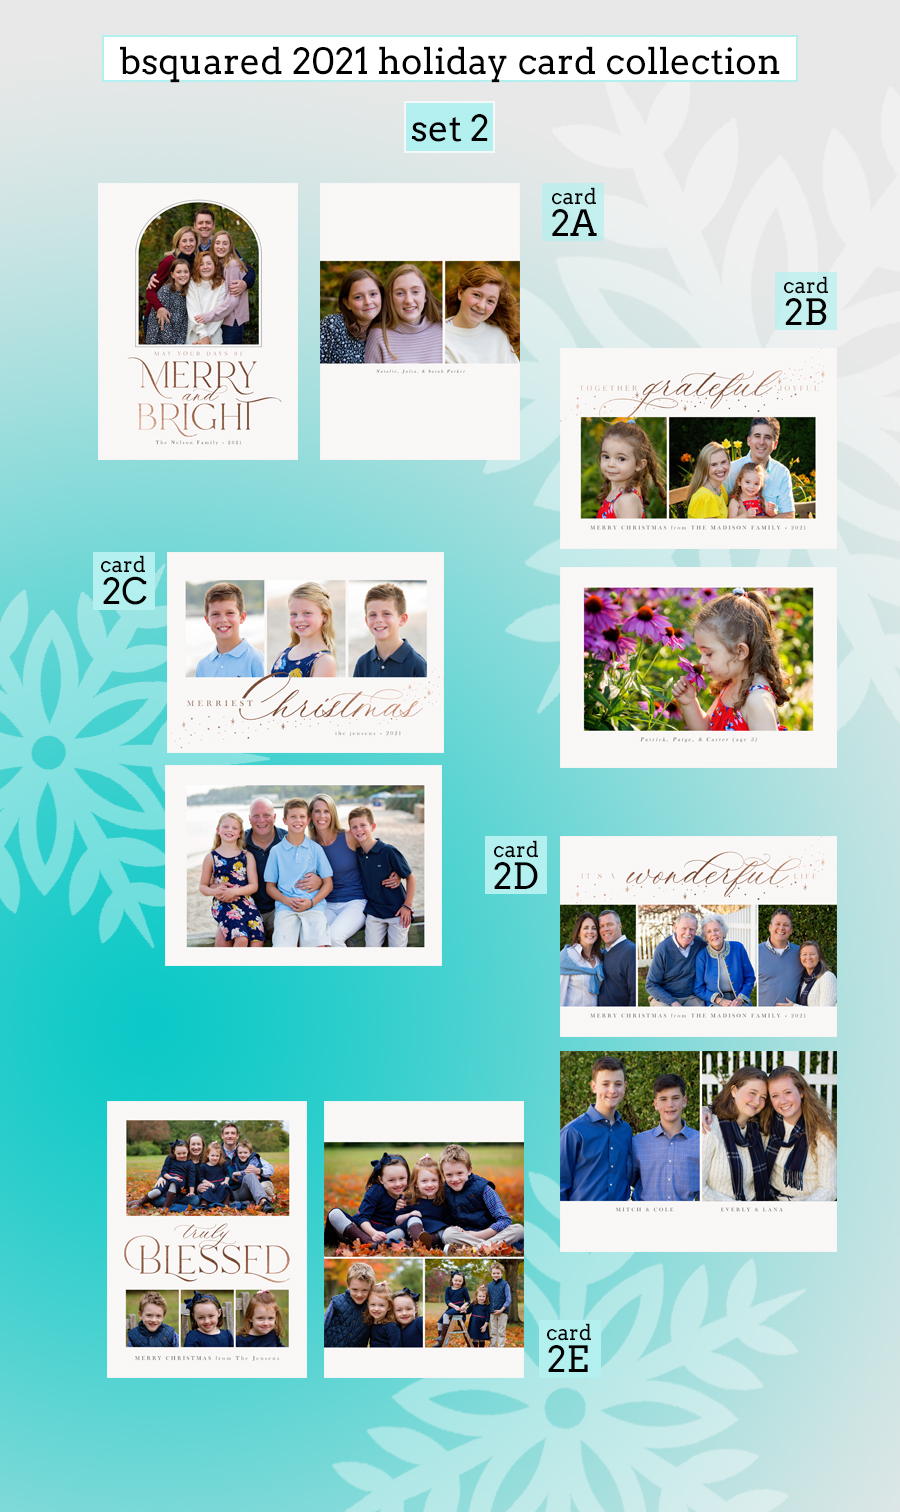 bsquared 2021 holiday cards 2